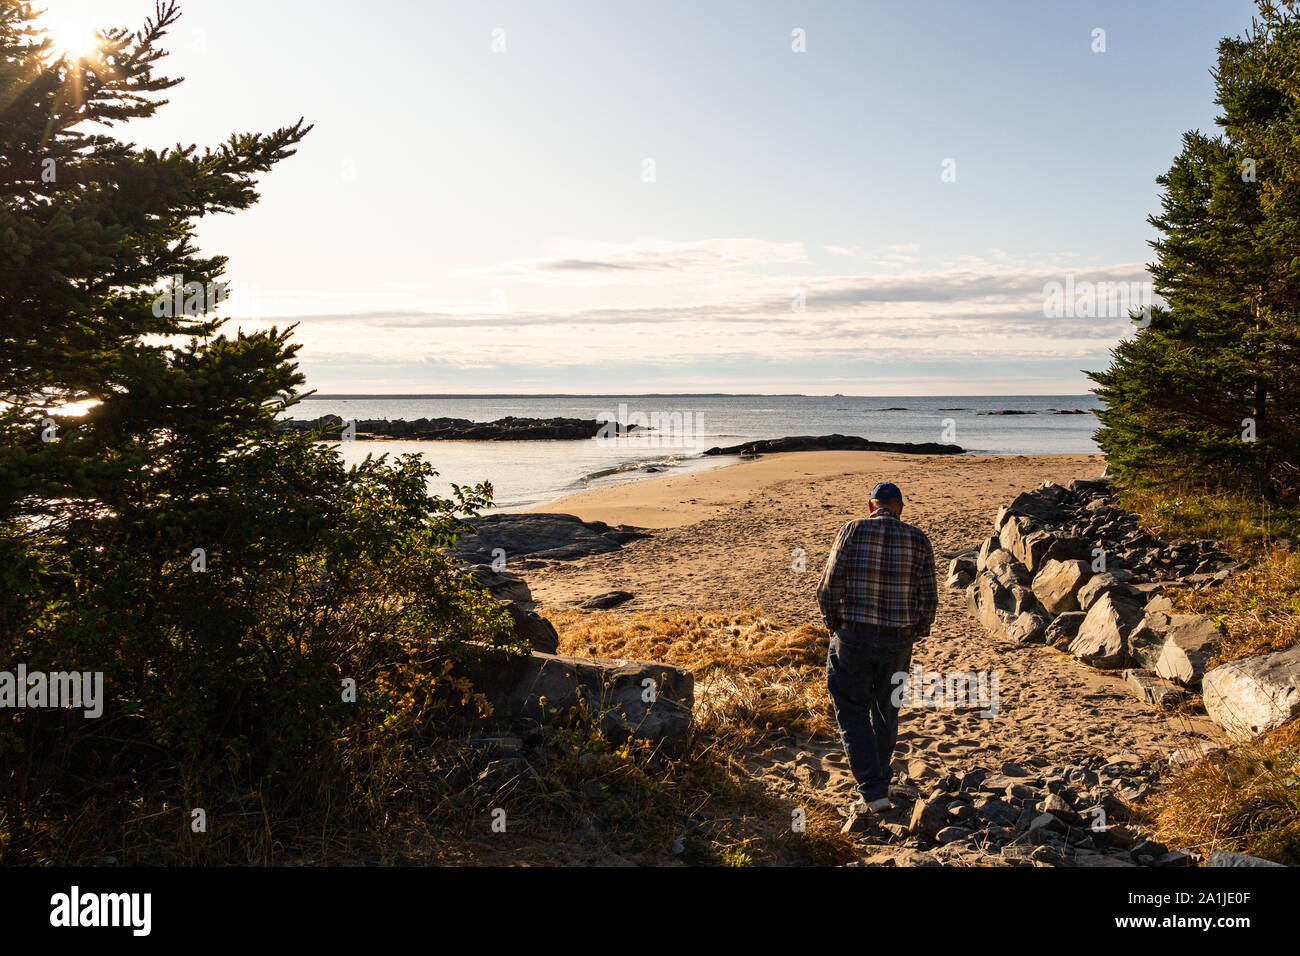 Senior gentleman going for an early morning stroll on the beach in Green Bay, Nova Scotia, Canada. Stock Photo